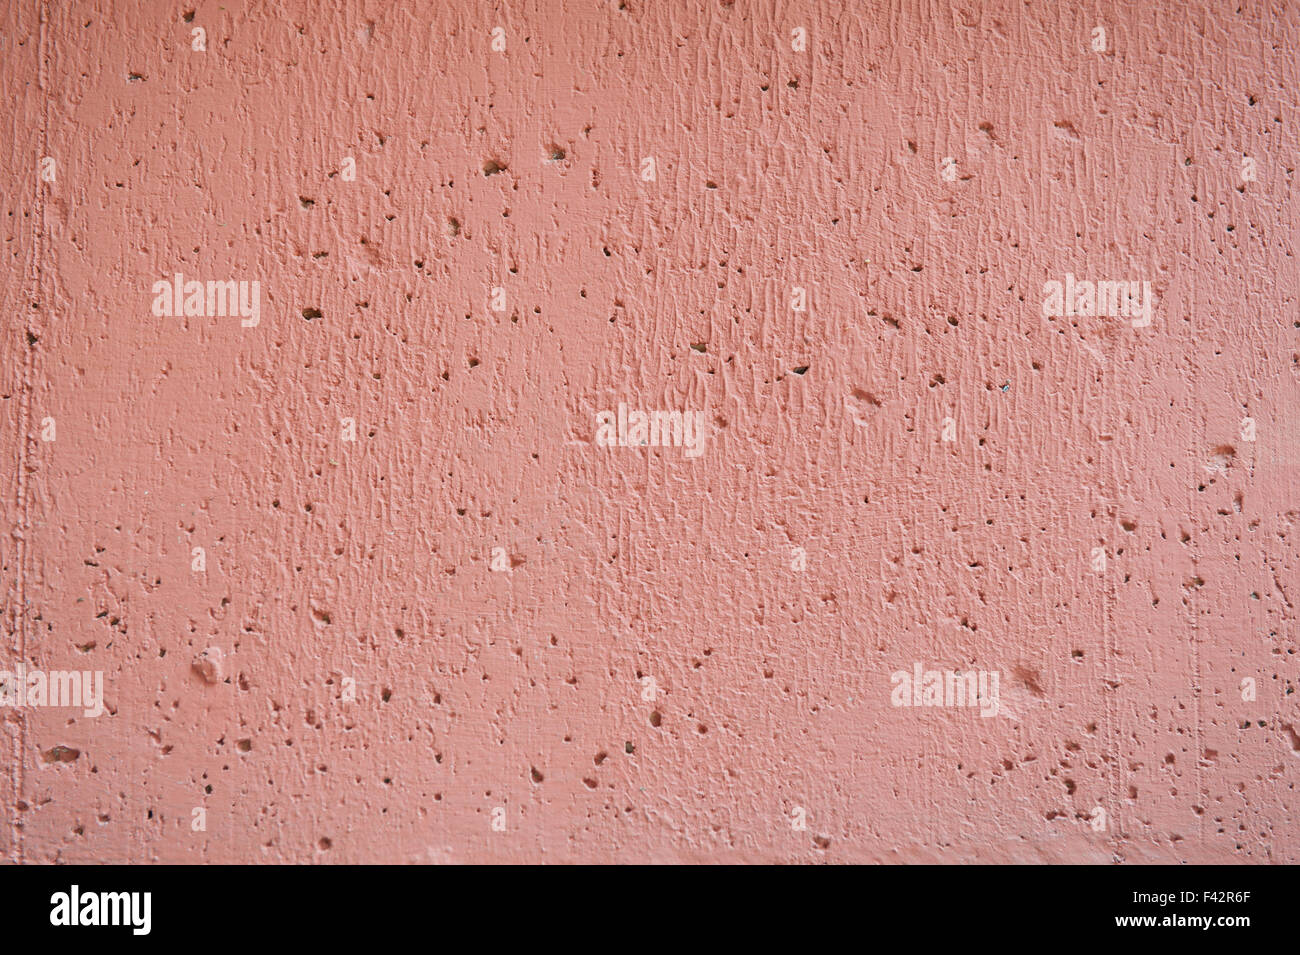 Salmon rough concrete wall uneven abstract background Stock Photo